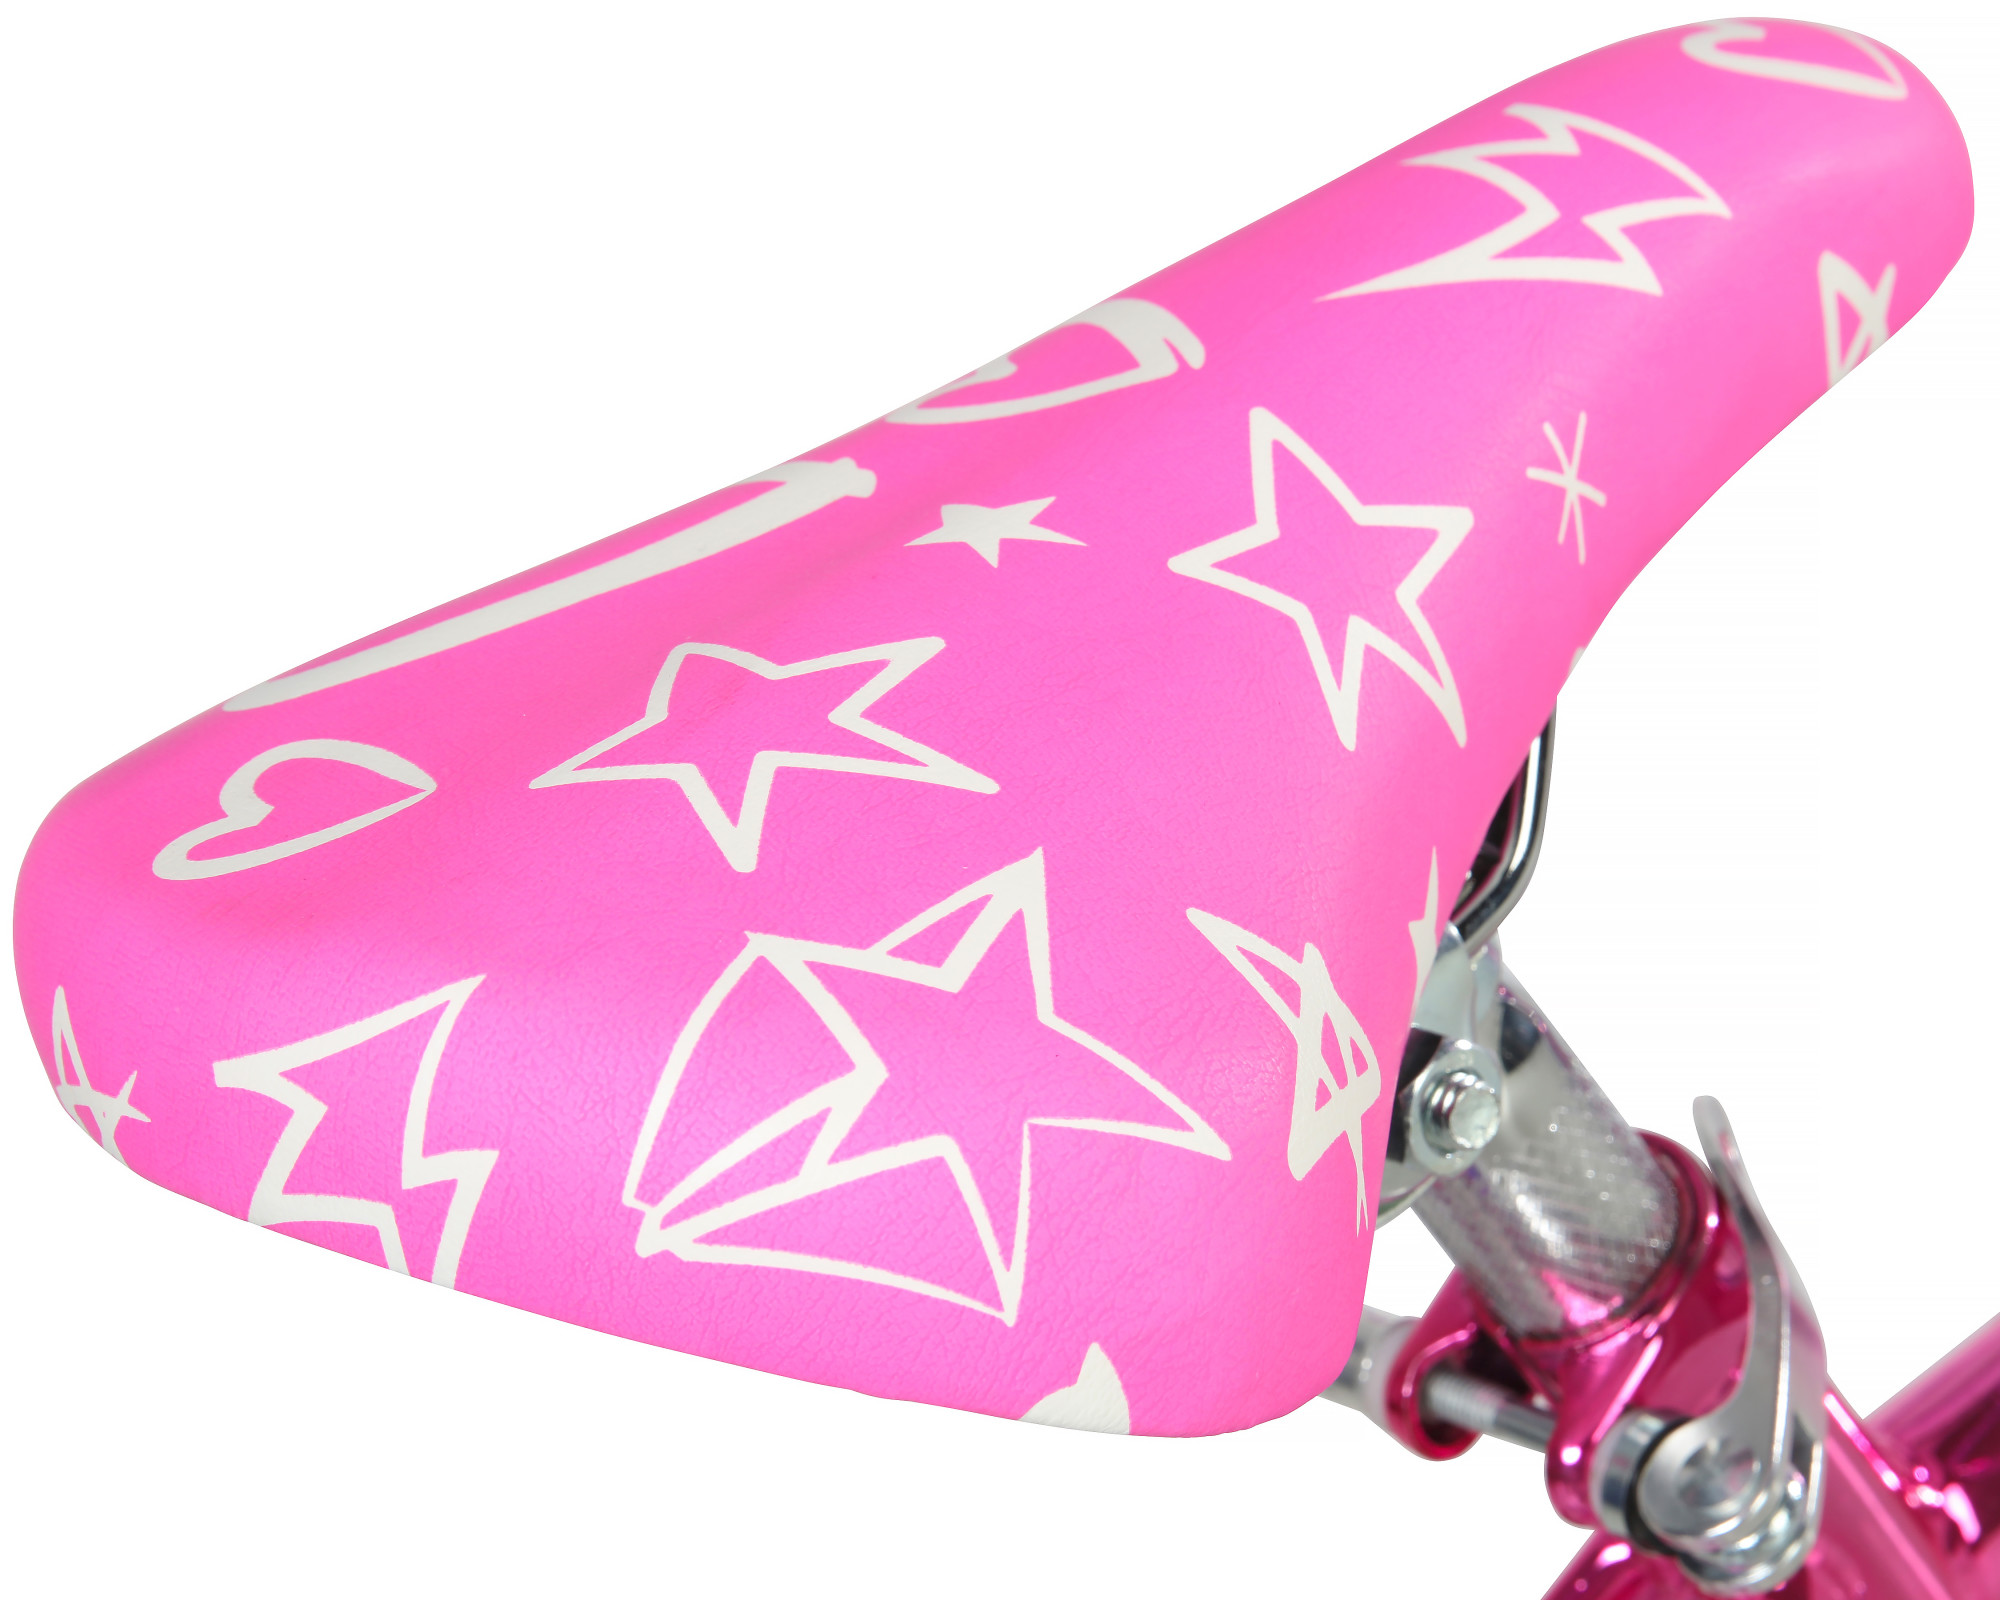 Dynacraft Barbie 16-inch Girls BMX Bike for Age 5-7 Years, Pink - image 4 of 8